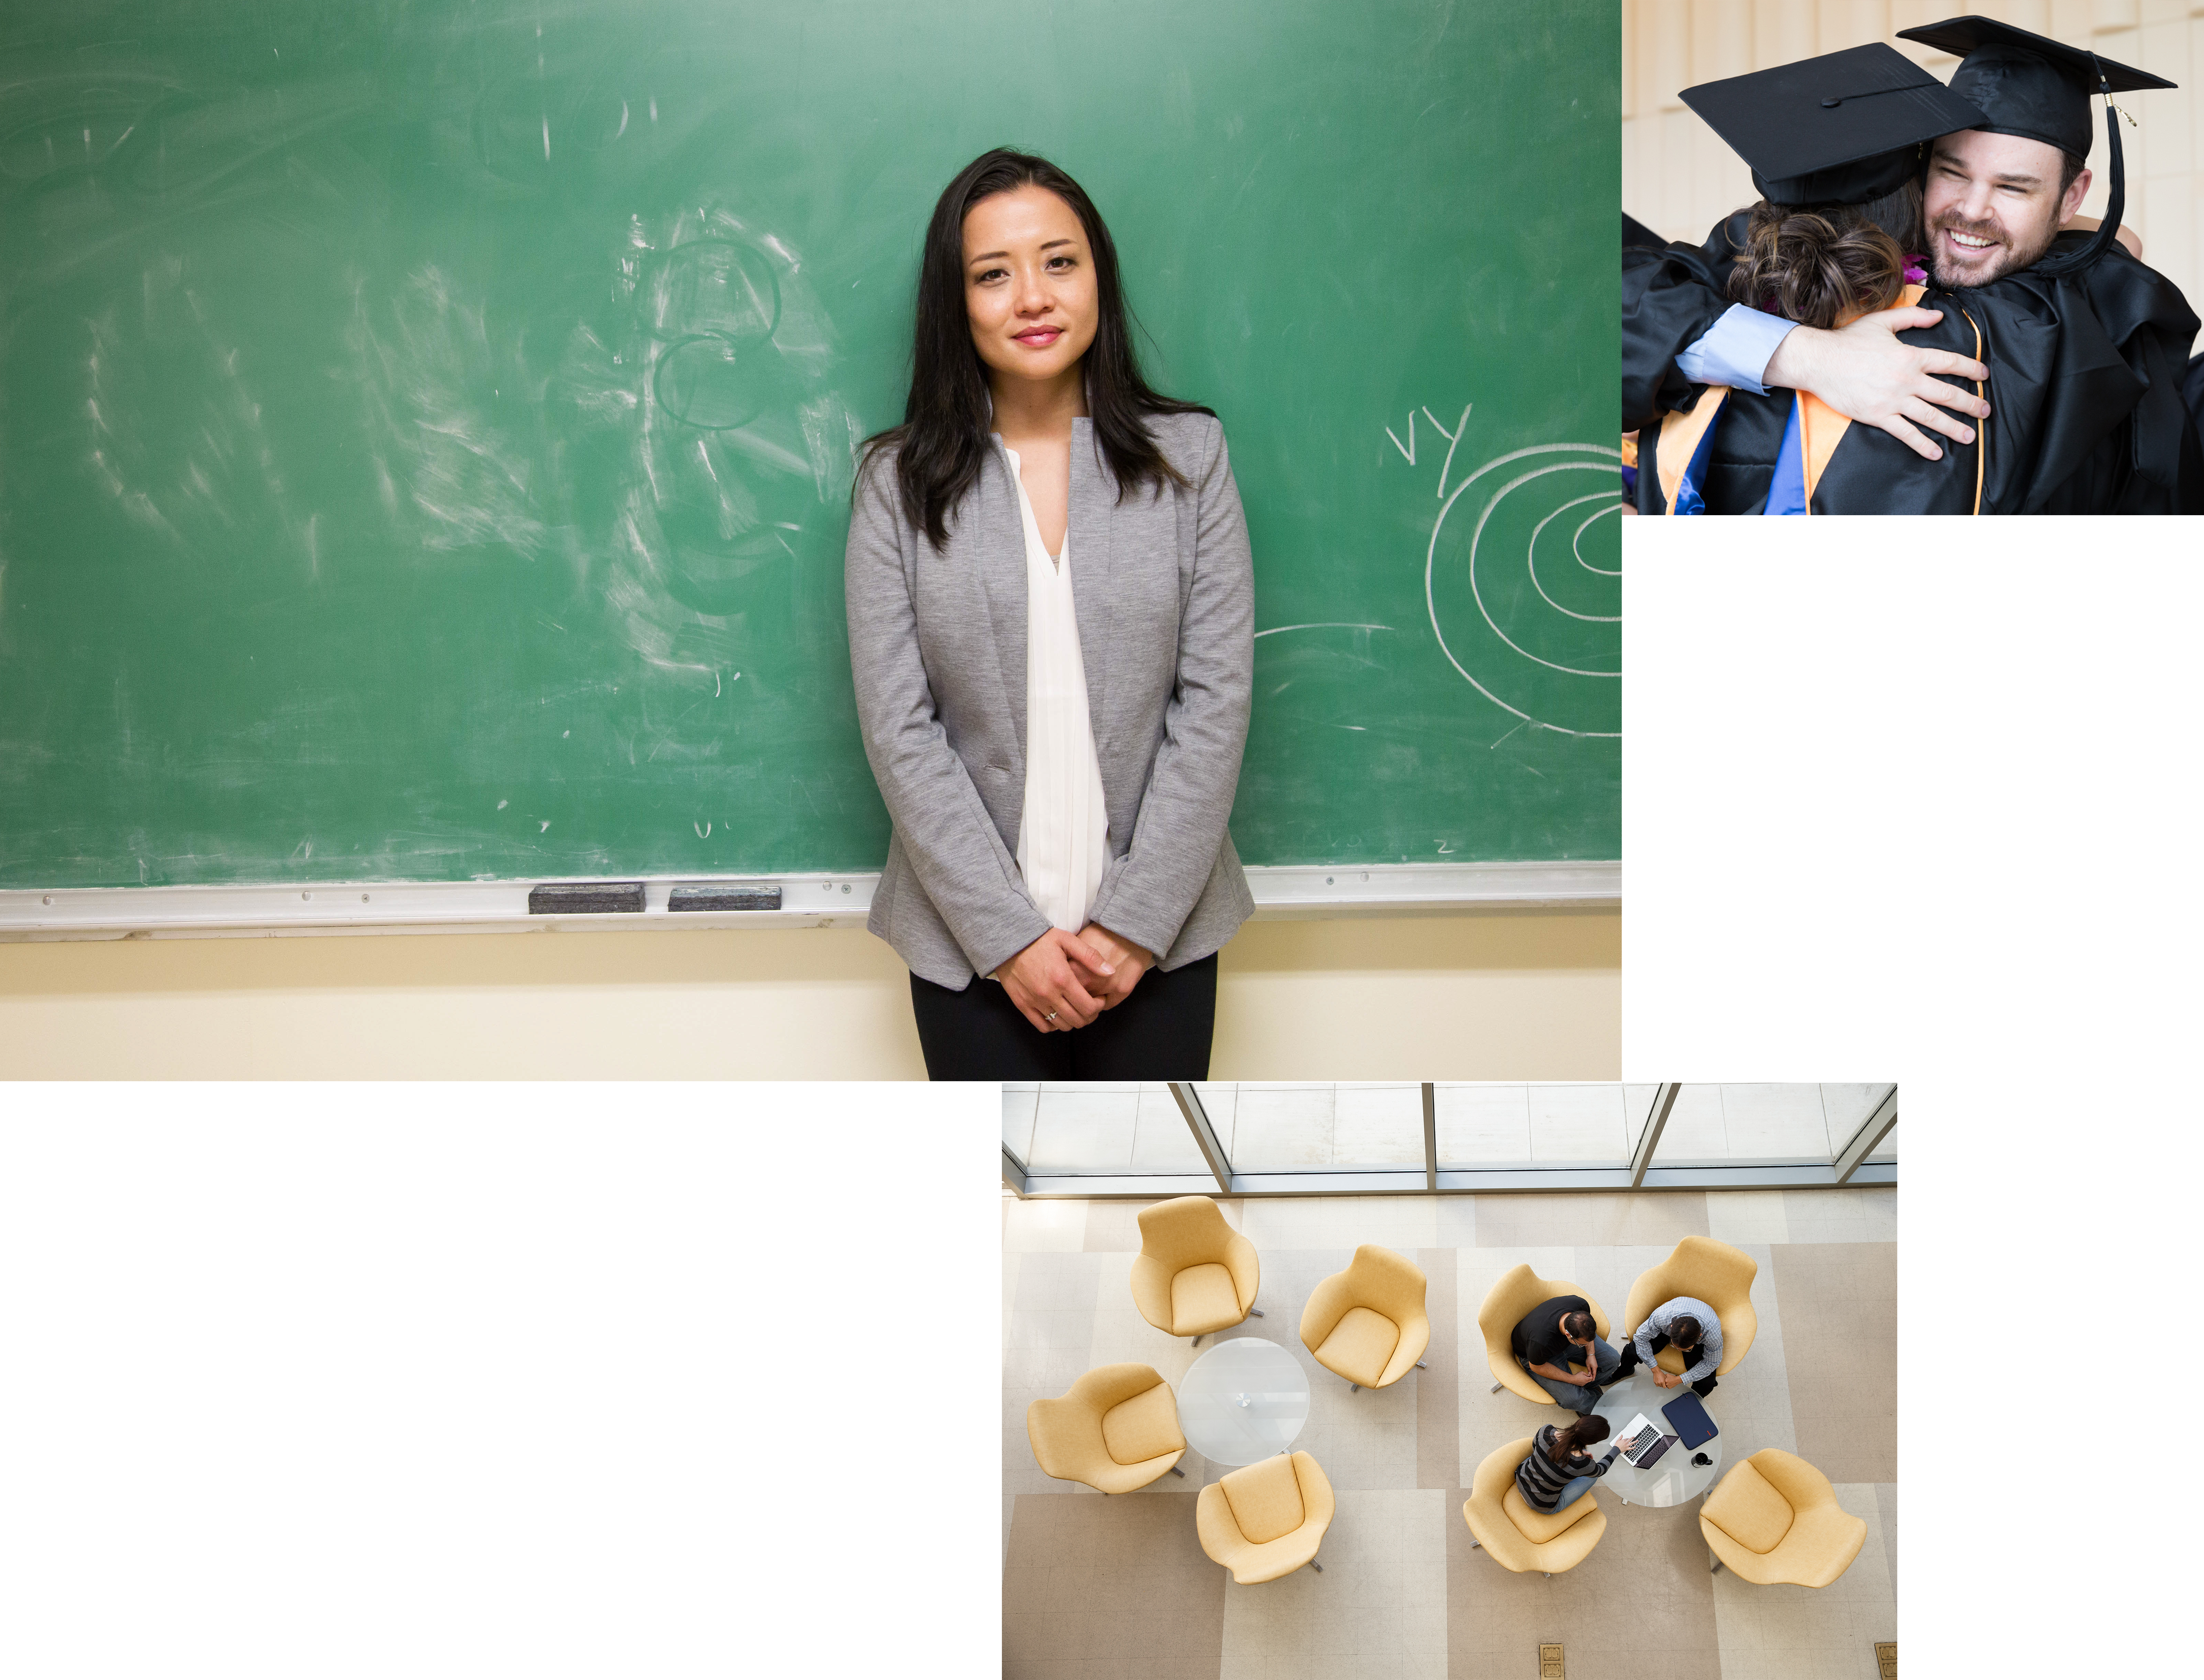 multiple images of students